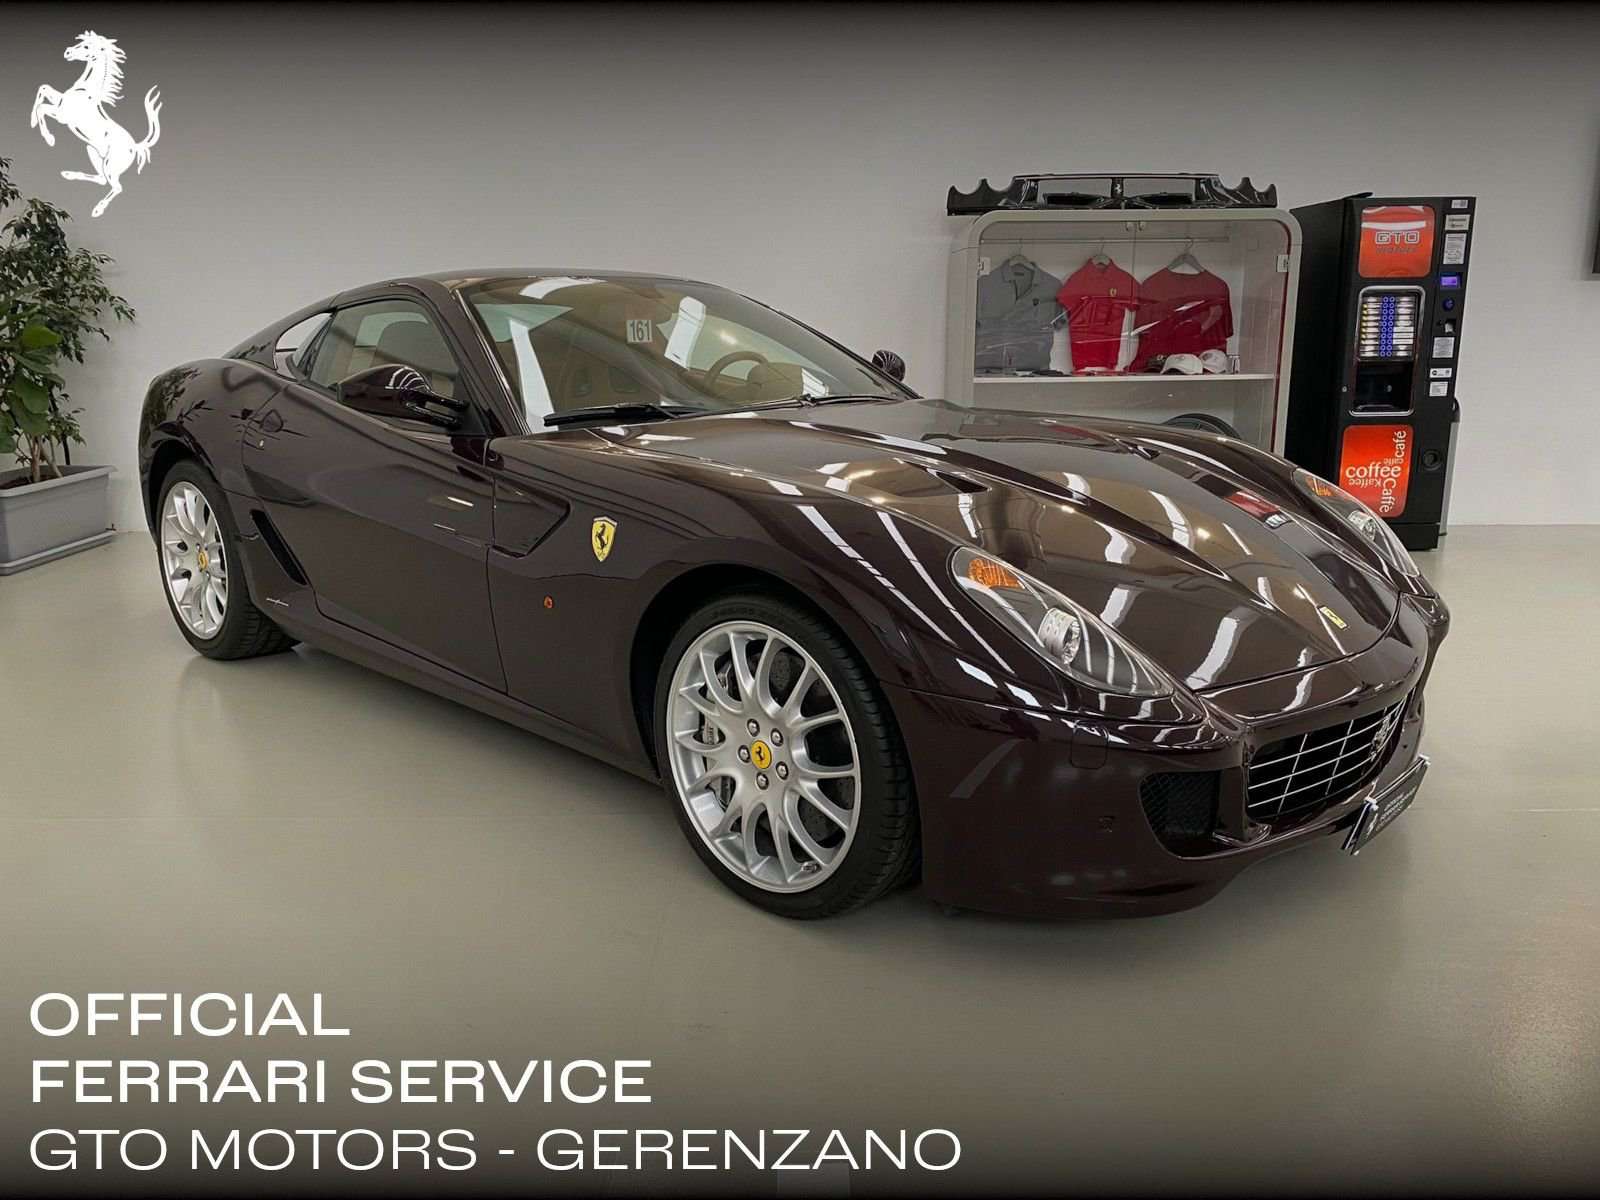 Ferrari 599 Coupe in Violet used in Gerenzano - Varese for € 695,000.-